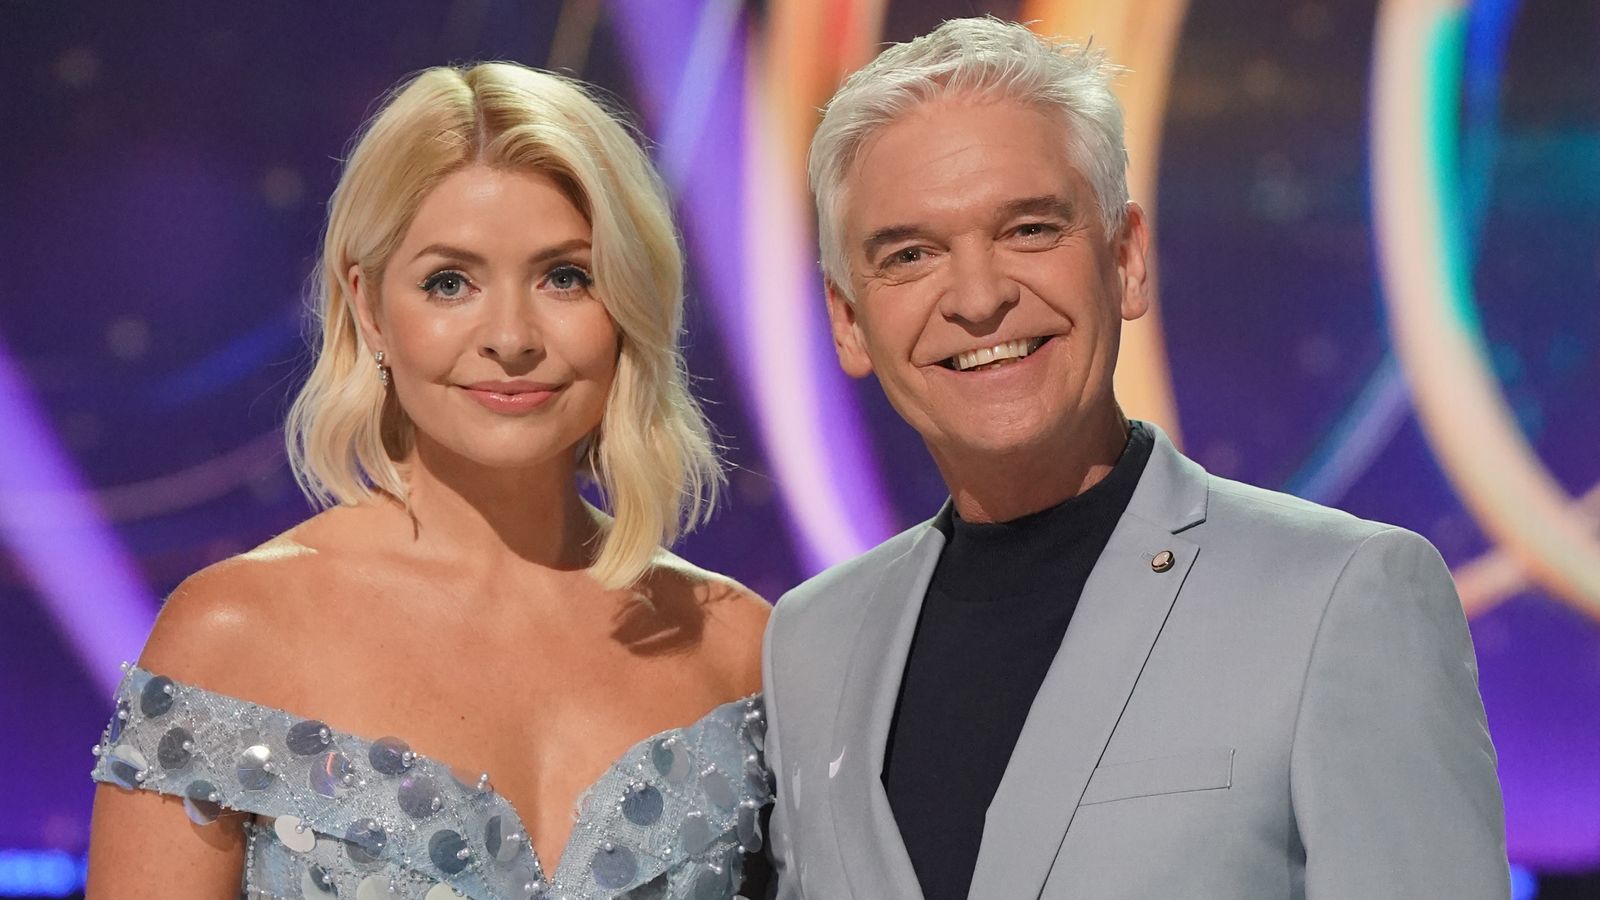 Phillip Schofield and Holly Willoughby: A timeline of their relationship and the rumours of a rift between This Morning co-hosts